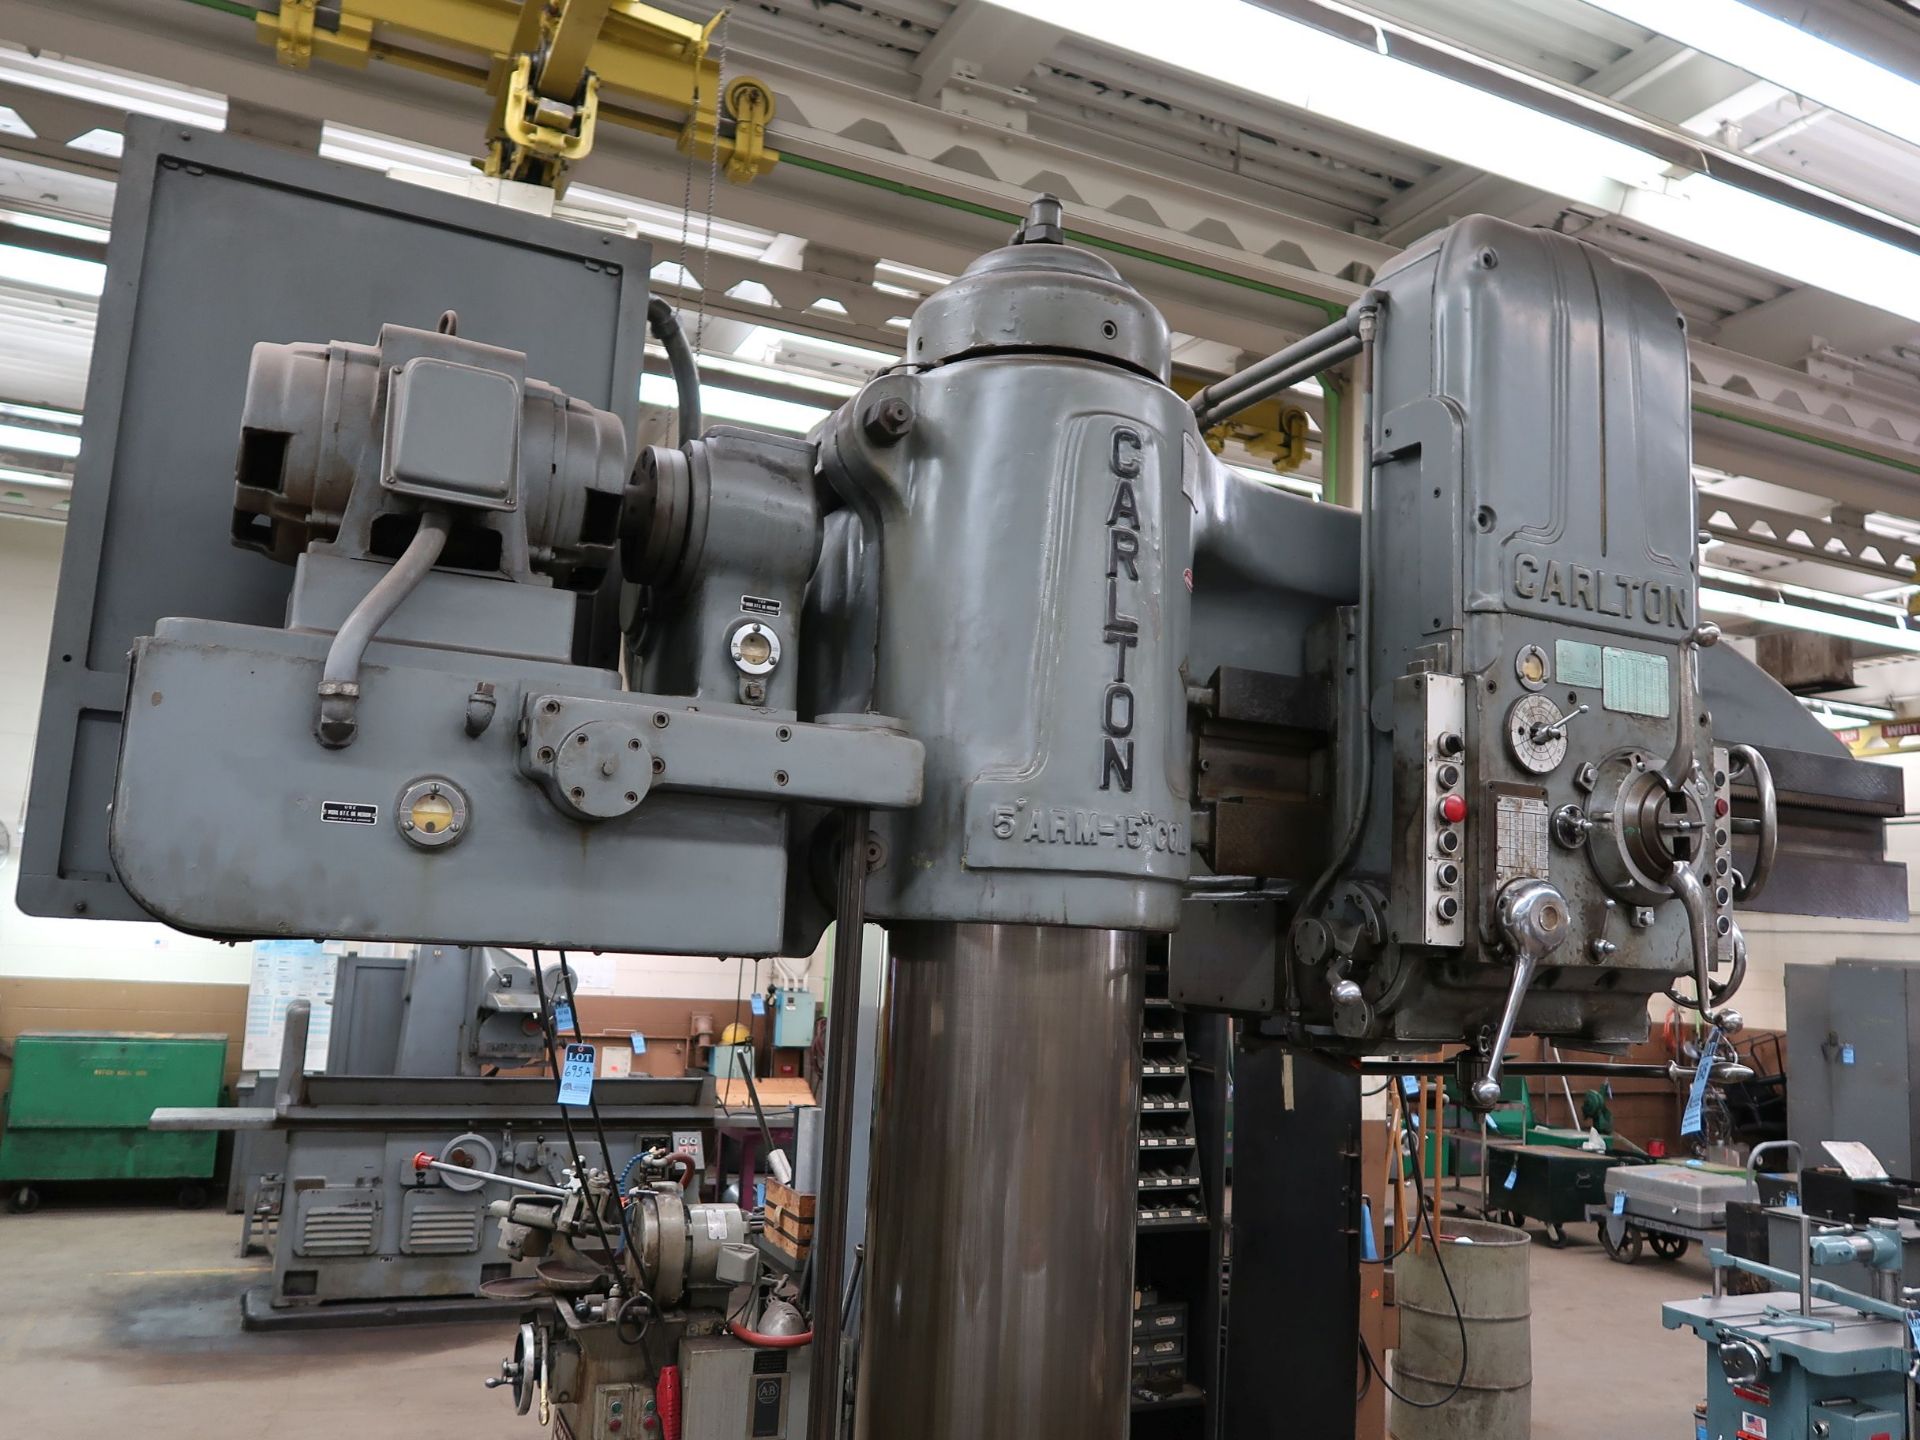 5' ARM X 15" COLUMN CARLTON RADIAL ARM DRILL; S/N 3A-4999, SPINDLE SPEEDS 12-1,200 RPM, 30" X 24" - Image 10 of 12